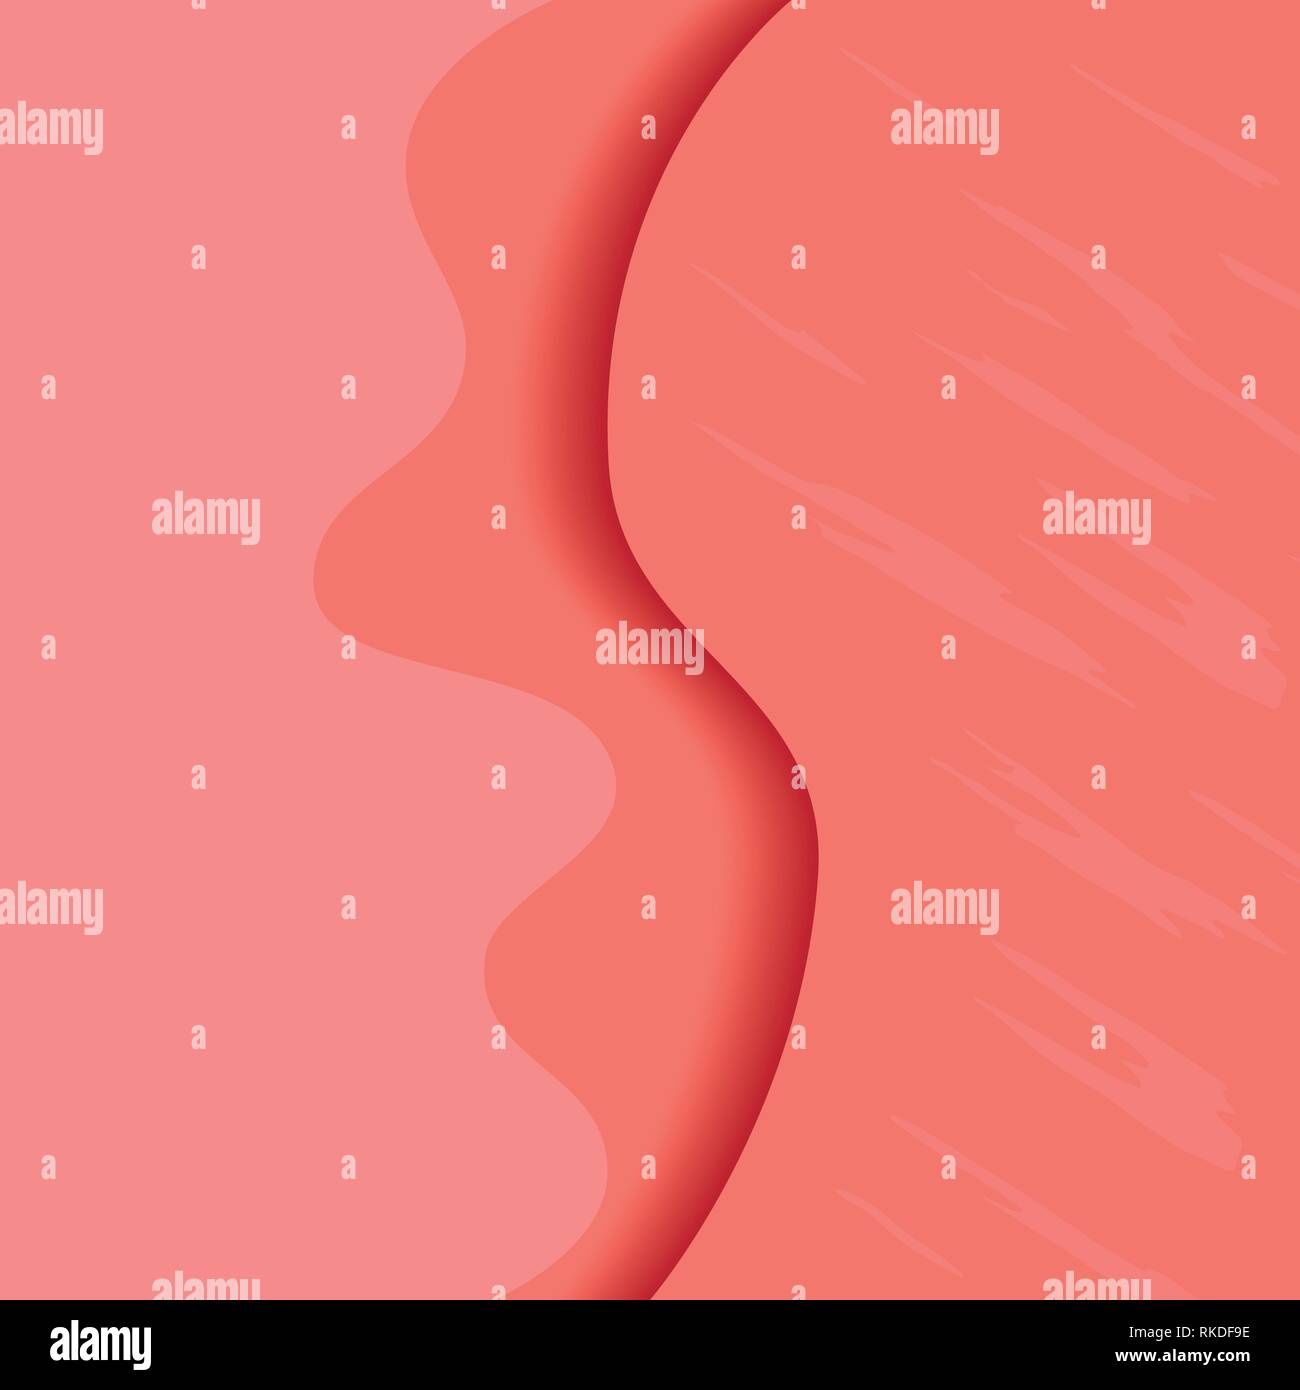 Modern Vector Backdrop With Creative Design Elements In Coral